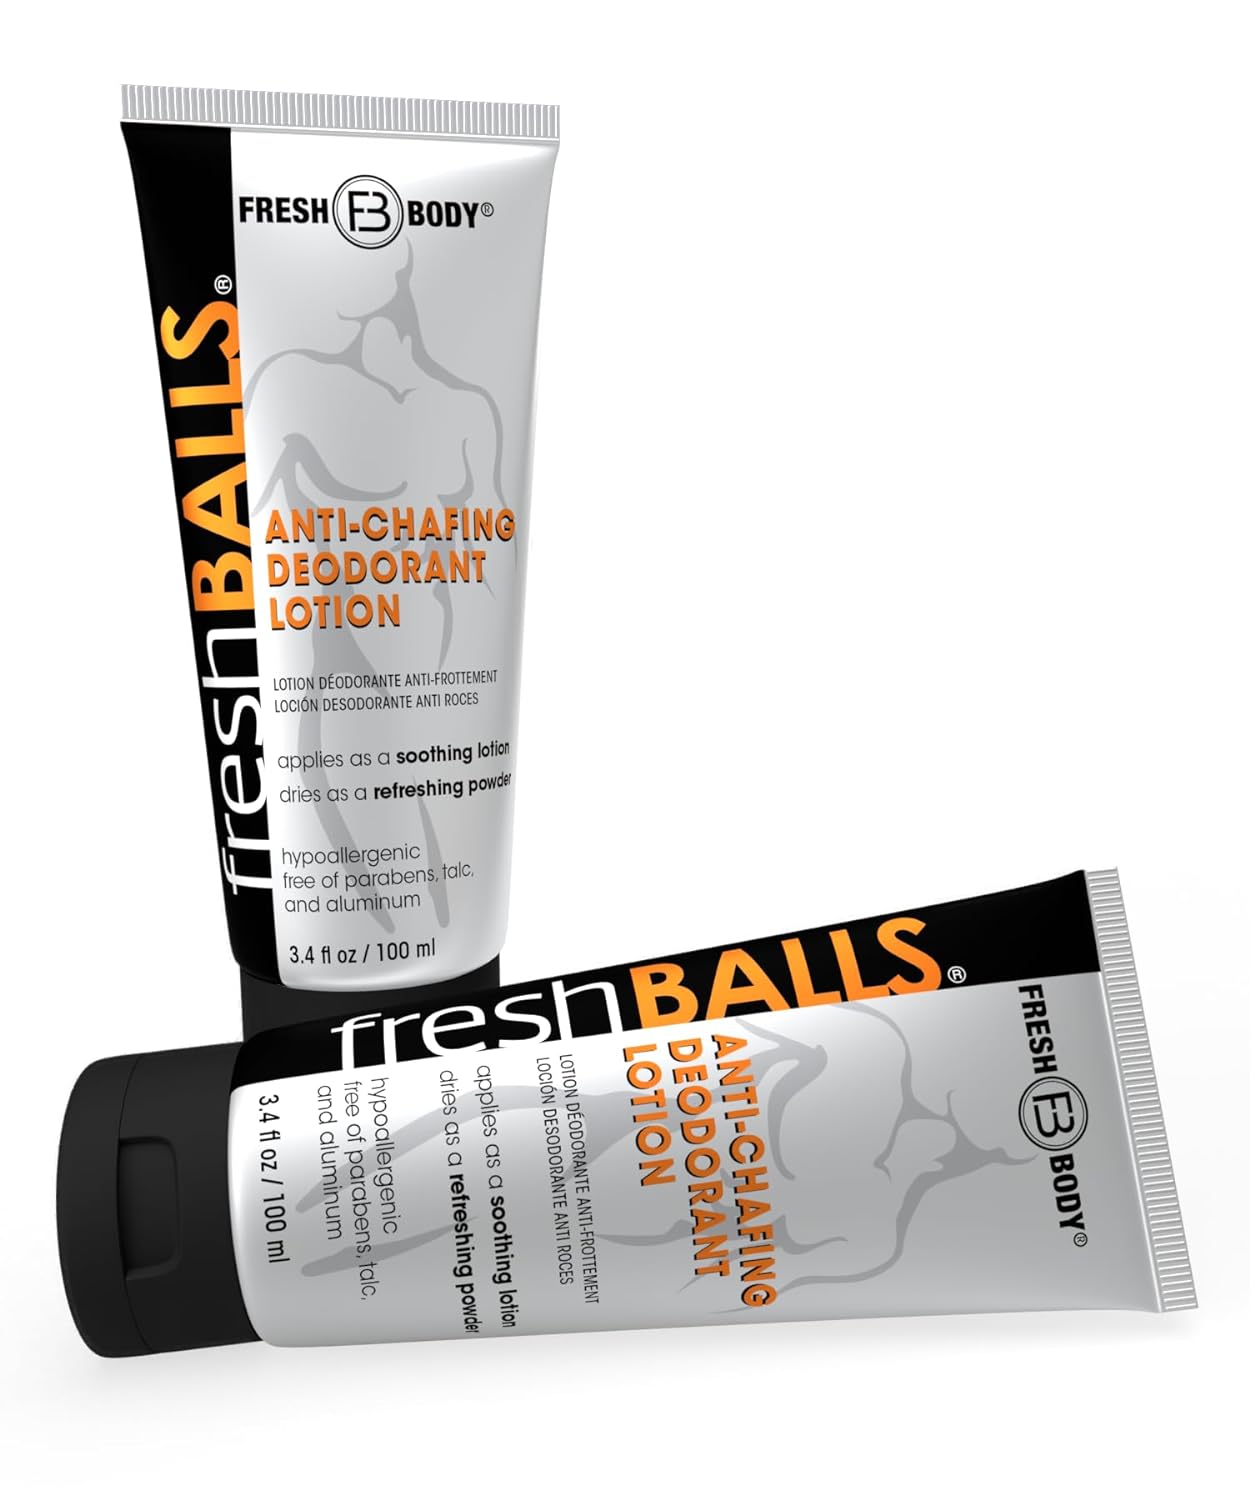 Fresh BALLS Lotion (2 Pack) Anti-Chafing Men's Soothing Cream to Powder Ball Deodorant and Hygiene for Groin Area, 3.4 fl oz